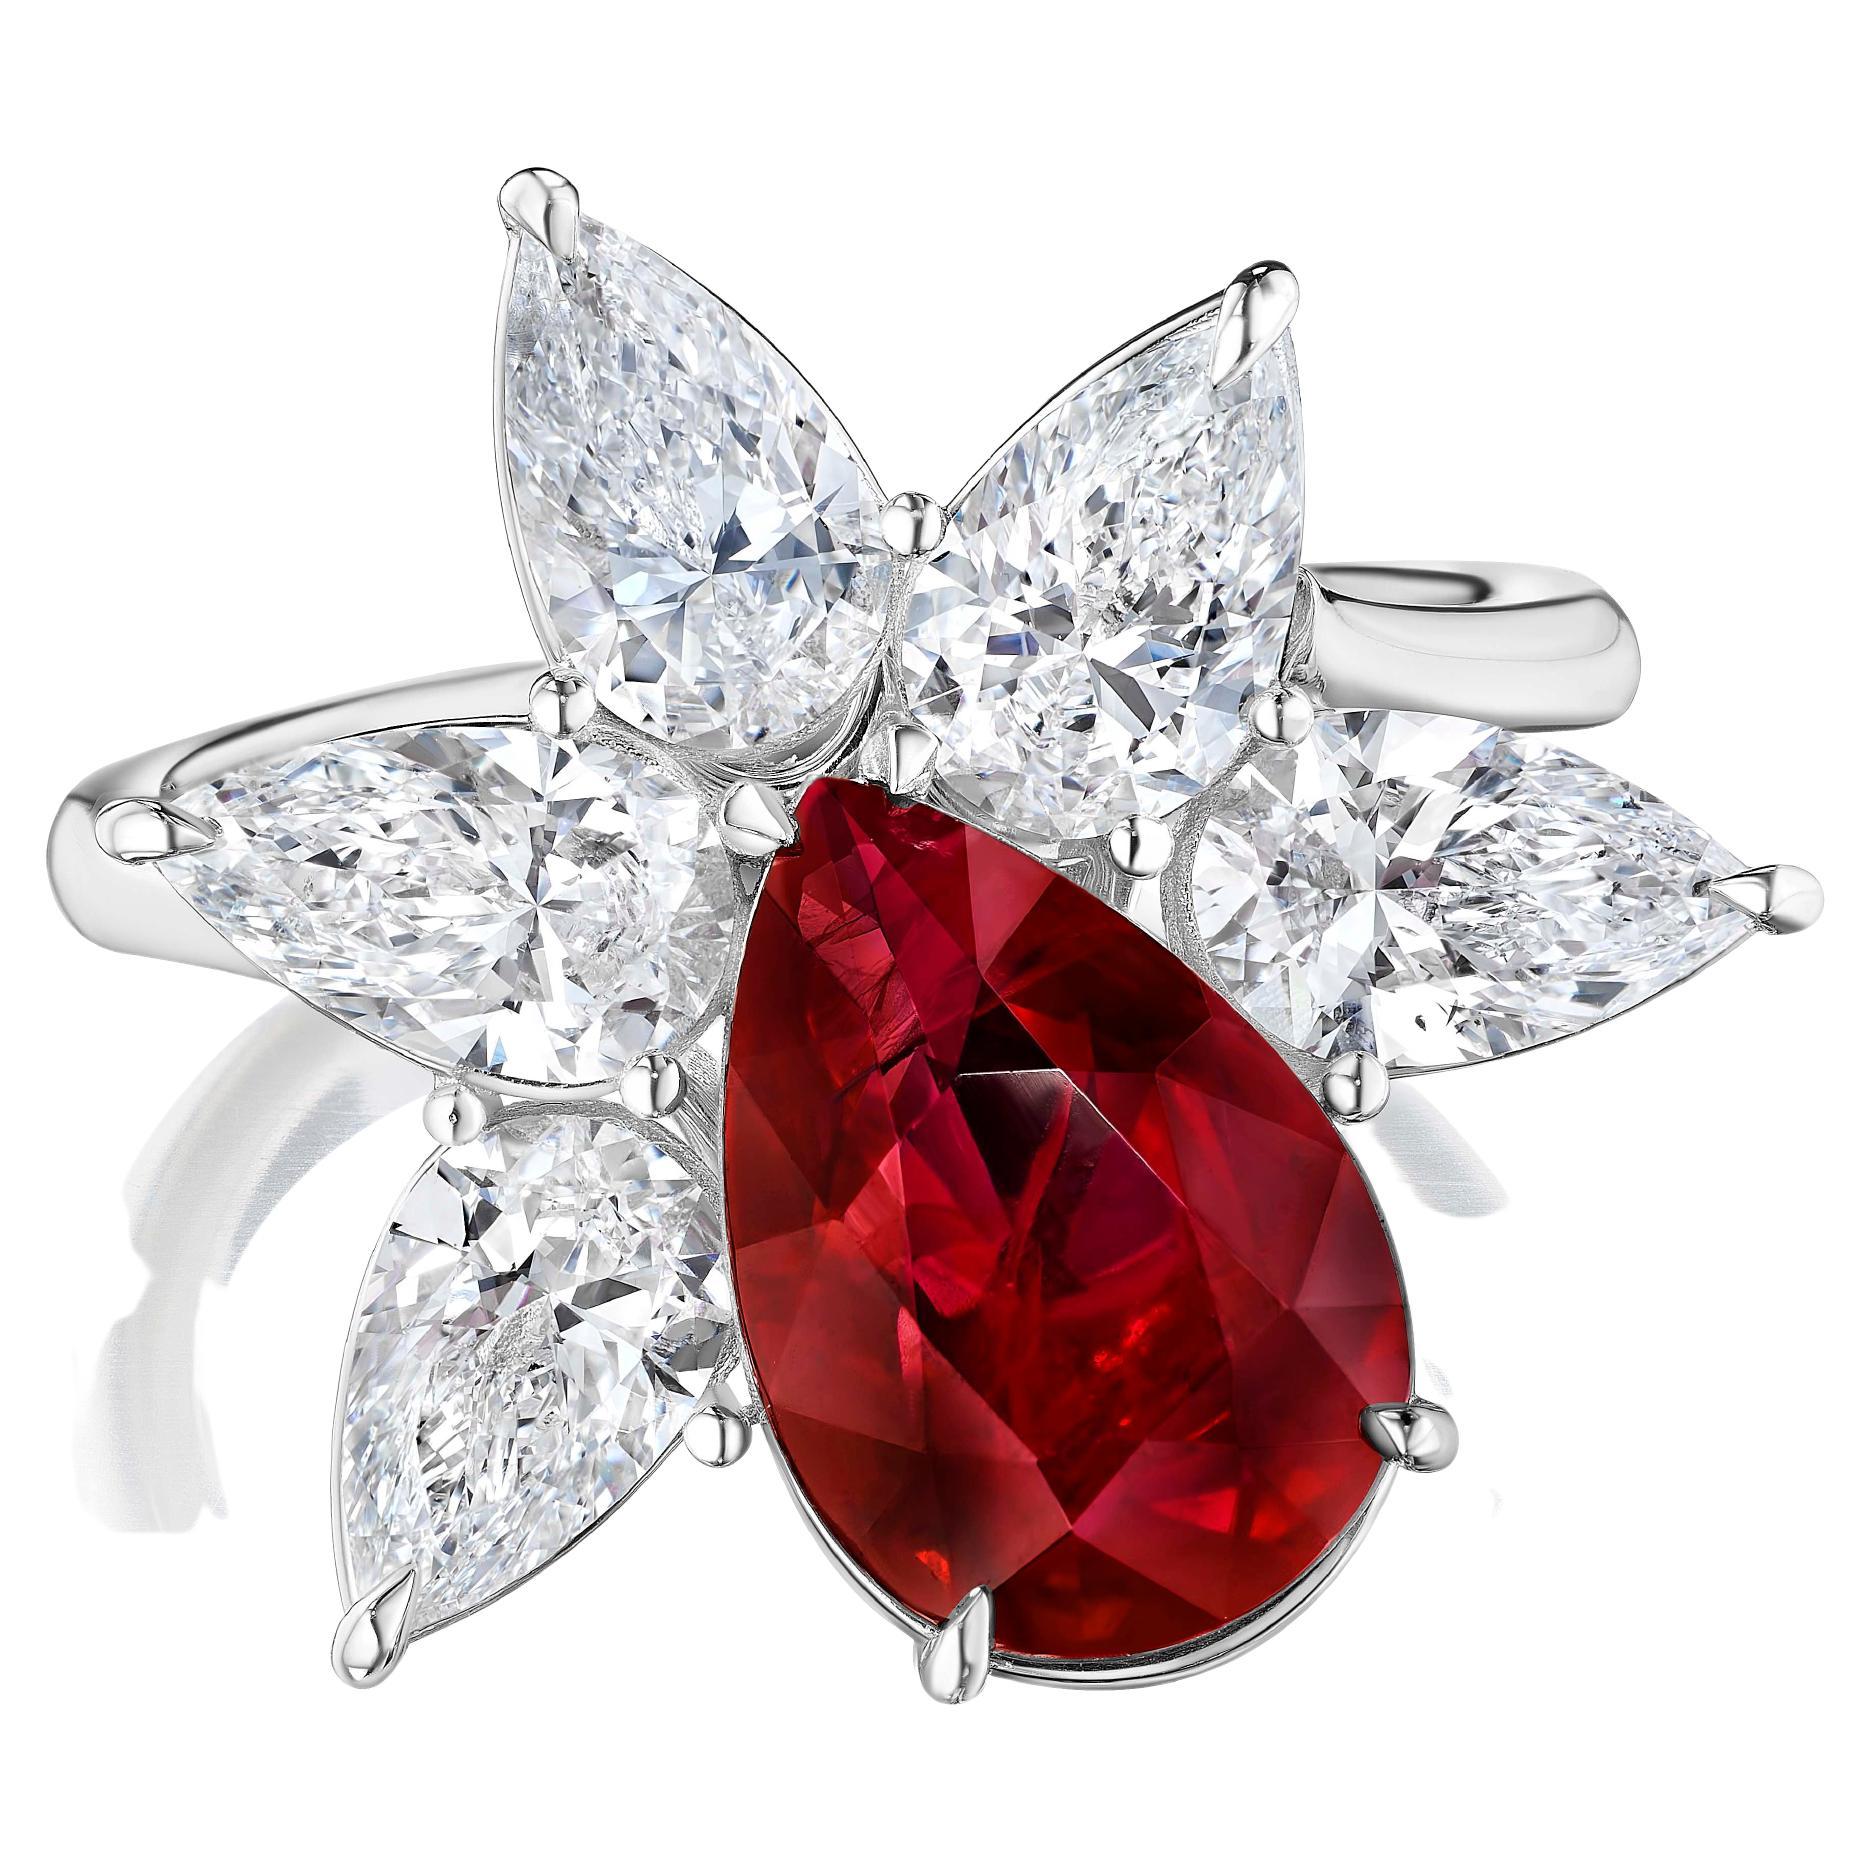 Magnificent Pear shape Ruby weighing 4.03 Carats, certified by GIA as Pigeons Blood in color. Heated, Burma Ruby.

Diamonds weigh 2.52 Carats. Graded by GIA as D color VS2-SI1 clarity.

Truly a fine masterpiece in every way.

Set in Platinum.